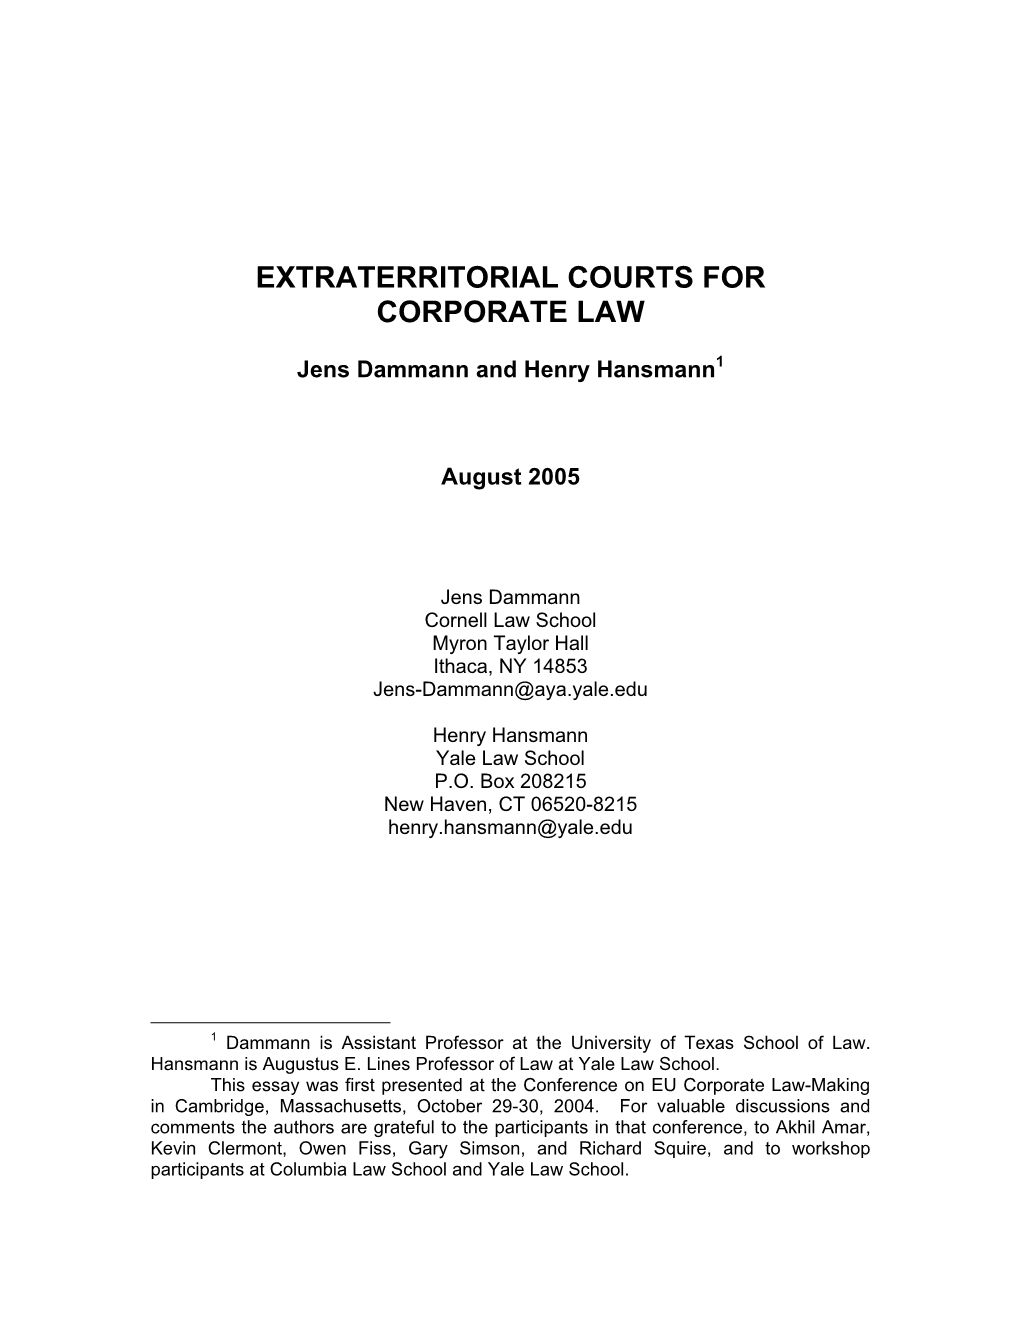 Extraterritorial Courts for Corporate Law